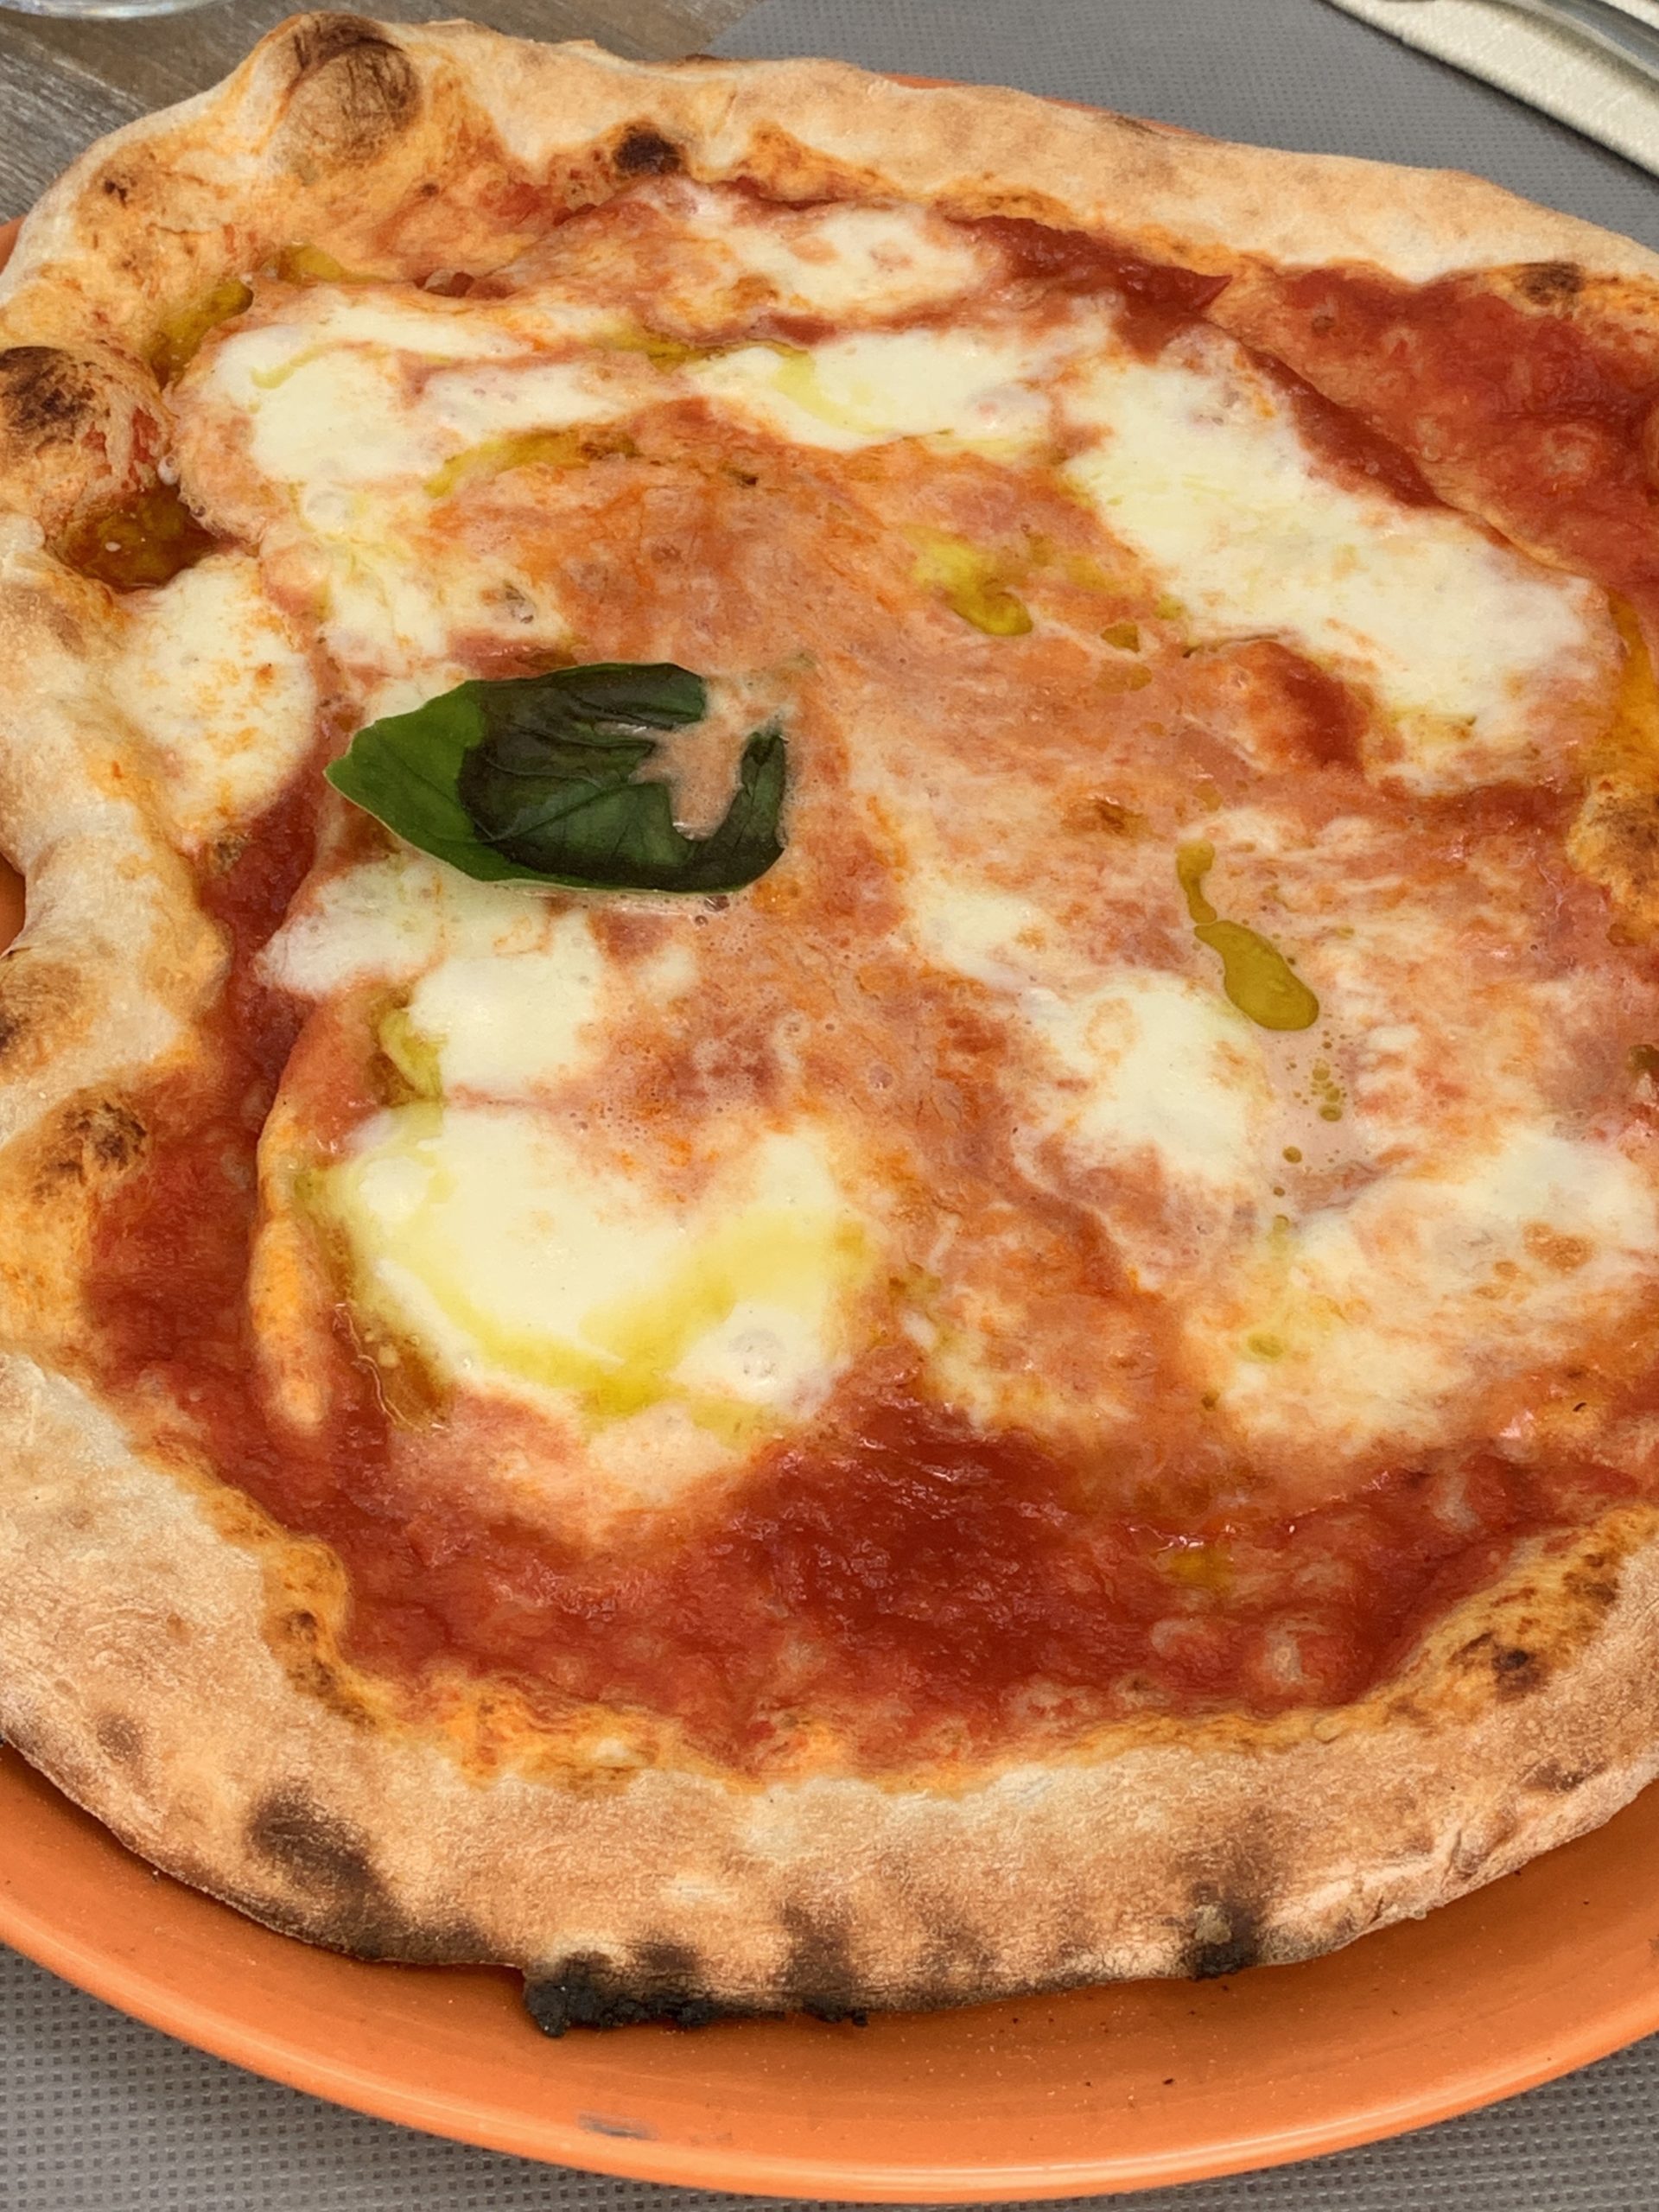 We know where to find the best pizza in Puglia.